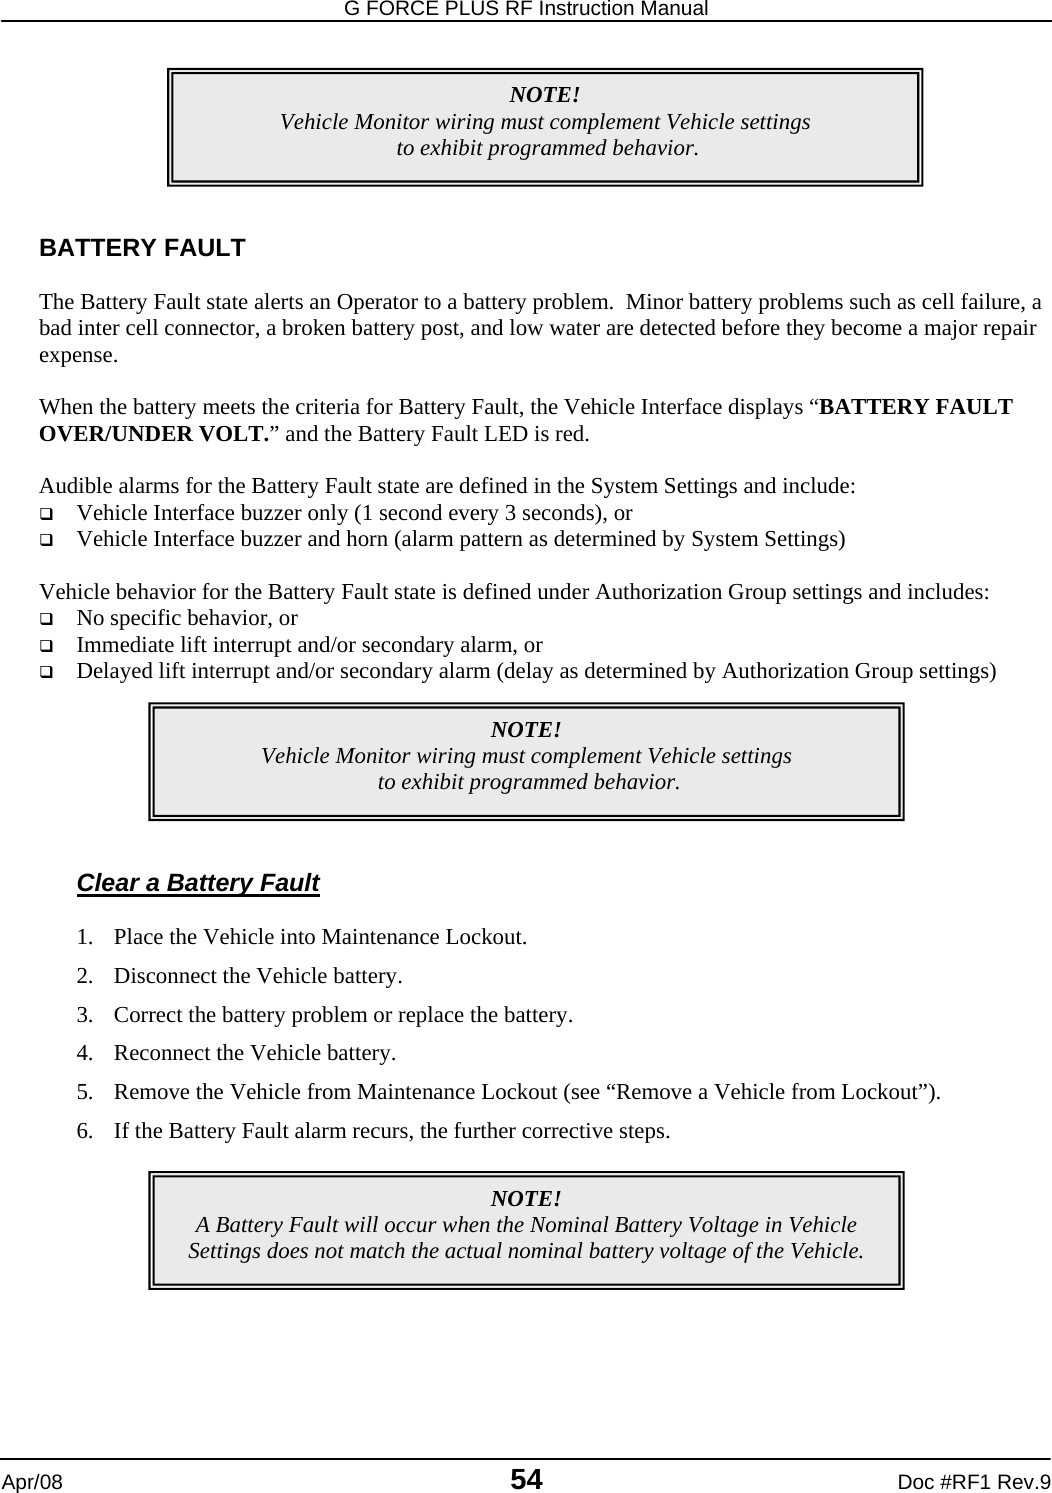 G FORCE PLUS RF Instruction Manual   Apr/08 54 Doc #RF1 Rev.9        BATTERY FAULT  The Battery Fault state alerts an Operator to a battery problem.  Minor battery problems such as cell failure, a bad inter cell connector, a broken battery post, and low water are detected before they become a major repair expense.  When the battery meets the criteria for Battery Fault, the Vehicle Interface displays “BATTERY FAULT OVER/UNDER VOLT.” and the Battery Fault LED is red.  Audible alarms for the Battery Fault state are defined in the System Settings and include:  Vehicle Interface buzzer only (1 second every 3 seconds), or  Vehicle Interface buzzer and horn (alarm pattern as determined by System Settings)  Vehicle behavior for the Battery Fault state is defined under Authorization Group settings and includes:  No specific behavior, or  Immediate lift interrupt and/or secondary alarm, or  Delayed lift interrupt and/or secondary alarm (delay as determined by Authorization Group settings)        Clear a Battery Fault  1. Place the Vehicle into Maintenance Lockout. 2. Disconnect the Vehicle battery. 3. Correct the battery problem or replace the battery.   4. Reconnect the Vehicle battery. 5. Remove the Vehicle from Maintenance Lockout (see “Remove a Vehicle from Lockout”). 6. If the Battery Fault alarm recurs, the further corrective steps.     NOTE! Vehicle Monitor wiring must complement Vehicle settings  to exhibit programmed behavior. NOTE! Vehicle Monitor wiring must complement Vehicle settings  to exhibit programmed behavior. NOTE! A Battery Fault will occur when the Nominal Battery Voltage in Vehicle Settings does not match the actual nominal battery voltage of the Vehicle. 